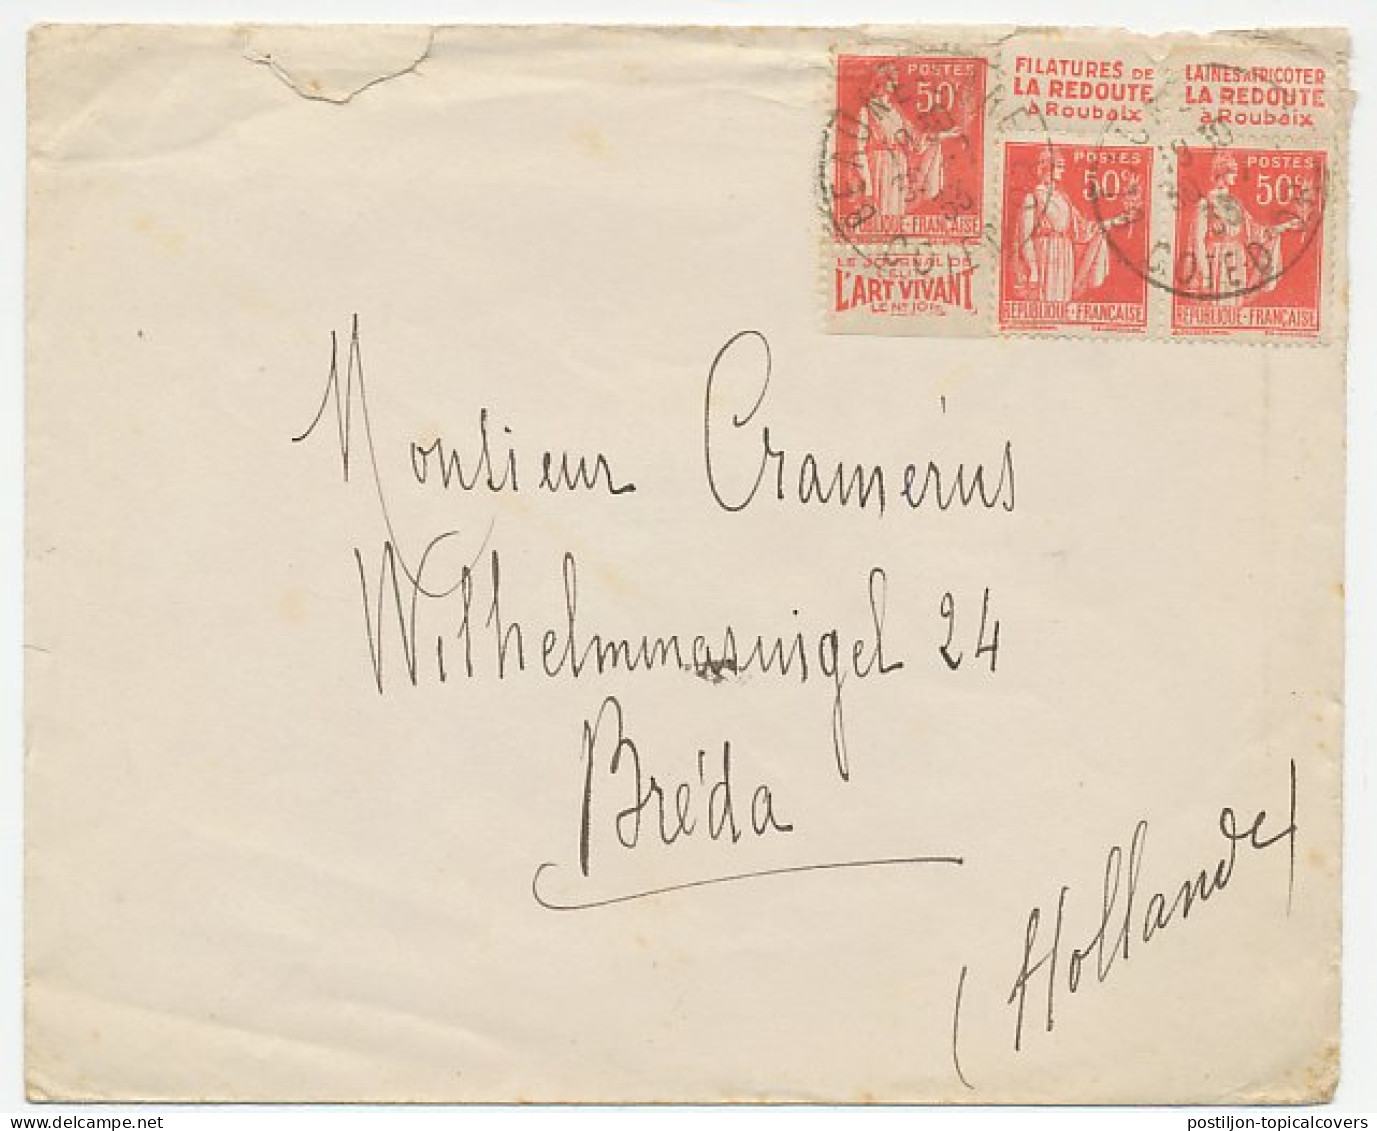 Cover / Stamps France 1932 Advertising - Spinning Mills - Wool Knitting - Art - Textiel